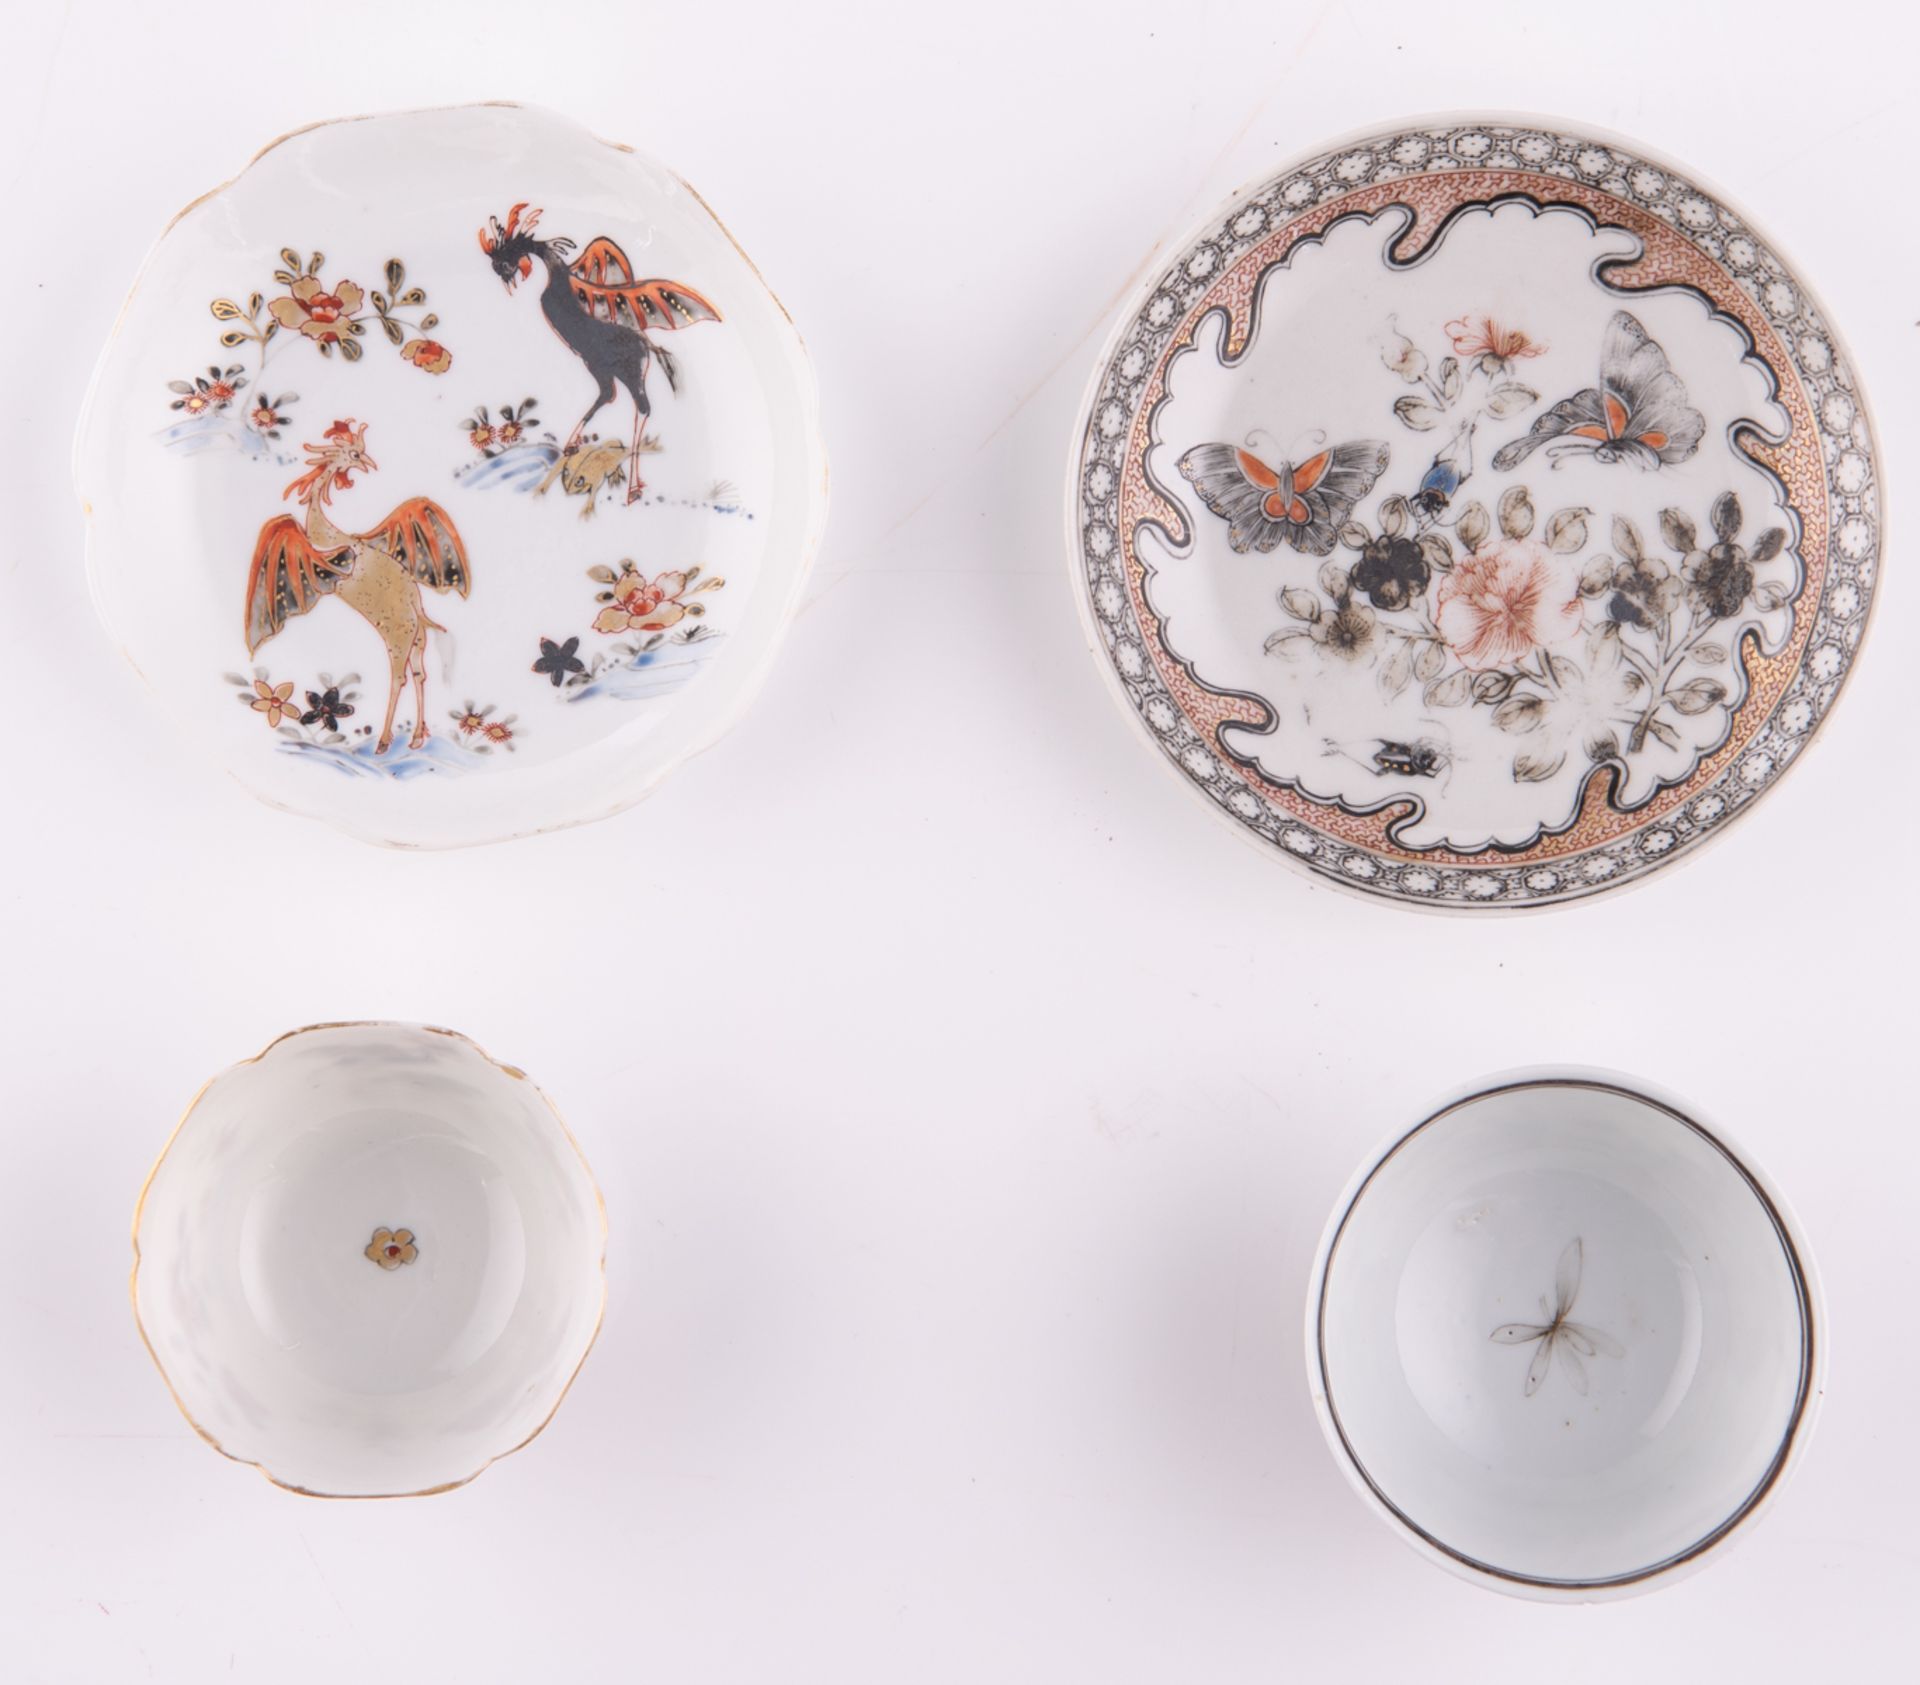 Two fine Chinese polychrome and gilt cups and saucers, decorated with flowers, insects, birds and a - Image 2 of 3